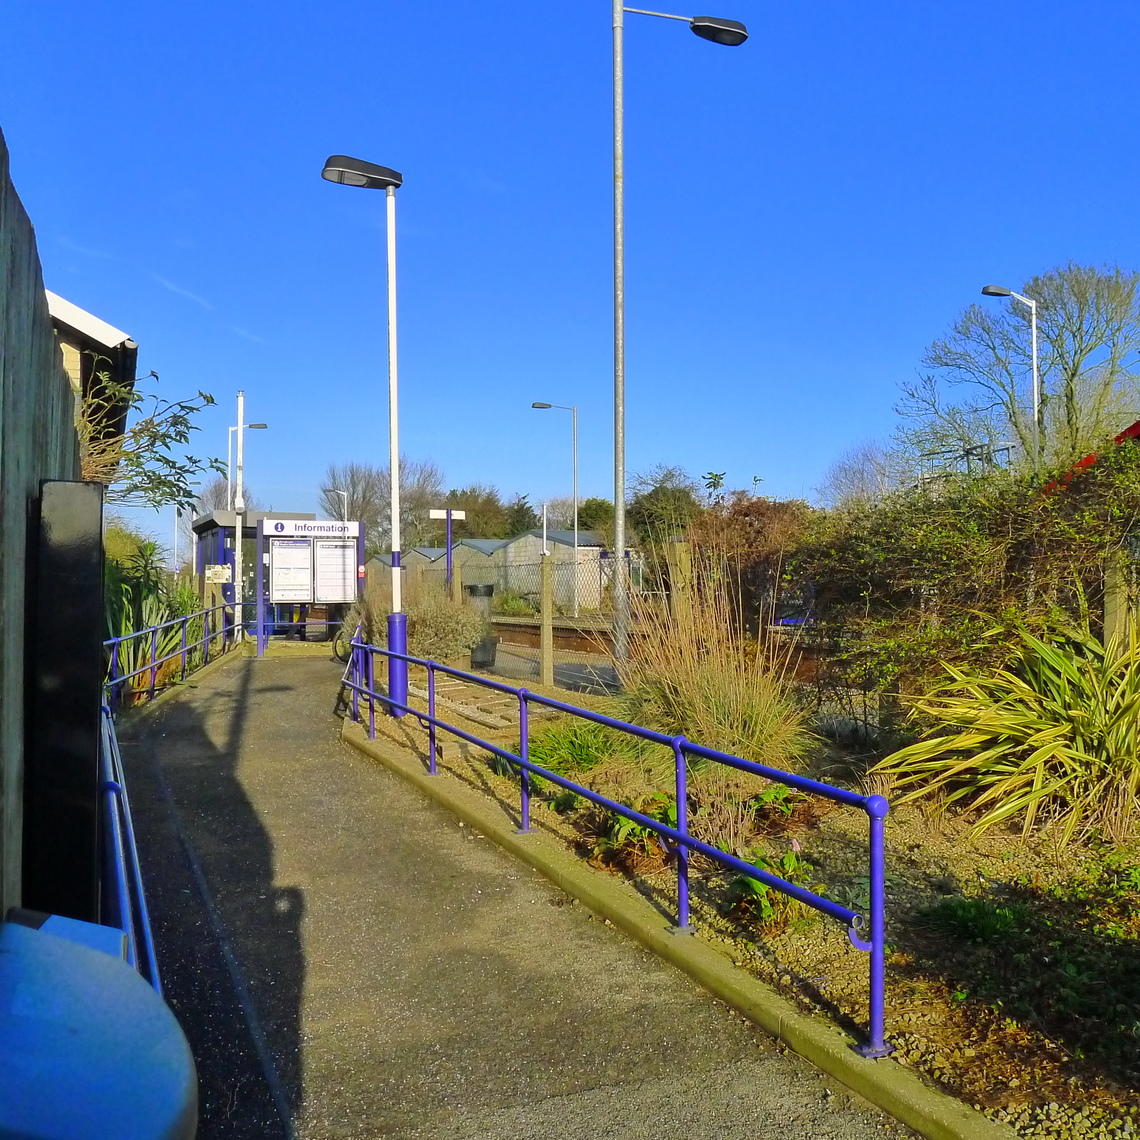 Entrance to the Scarborough Platform in the winter of 2018 at Hunmanby Railway Station